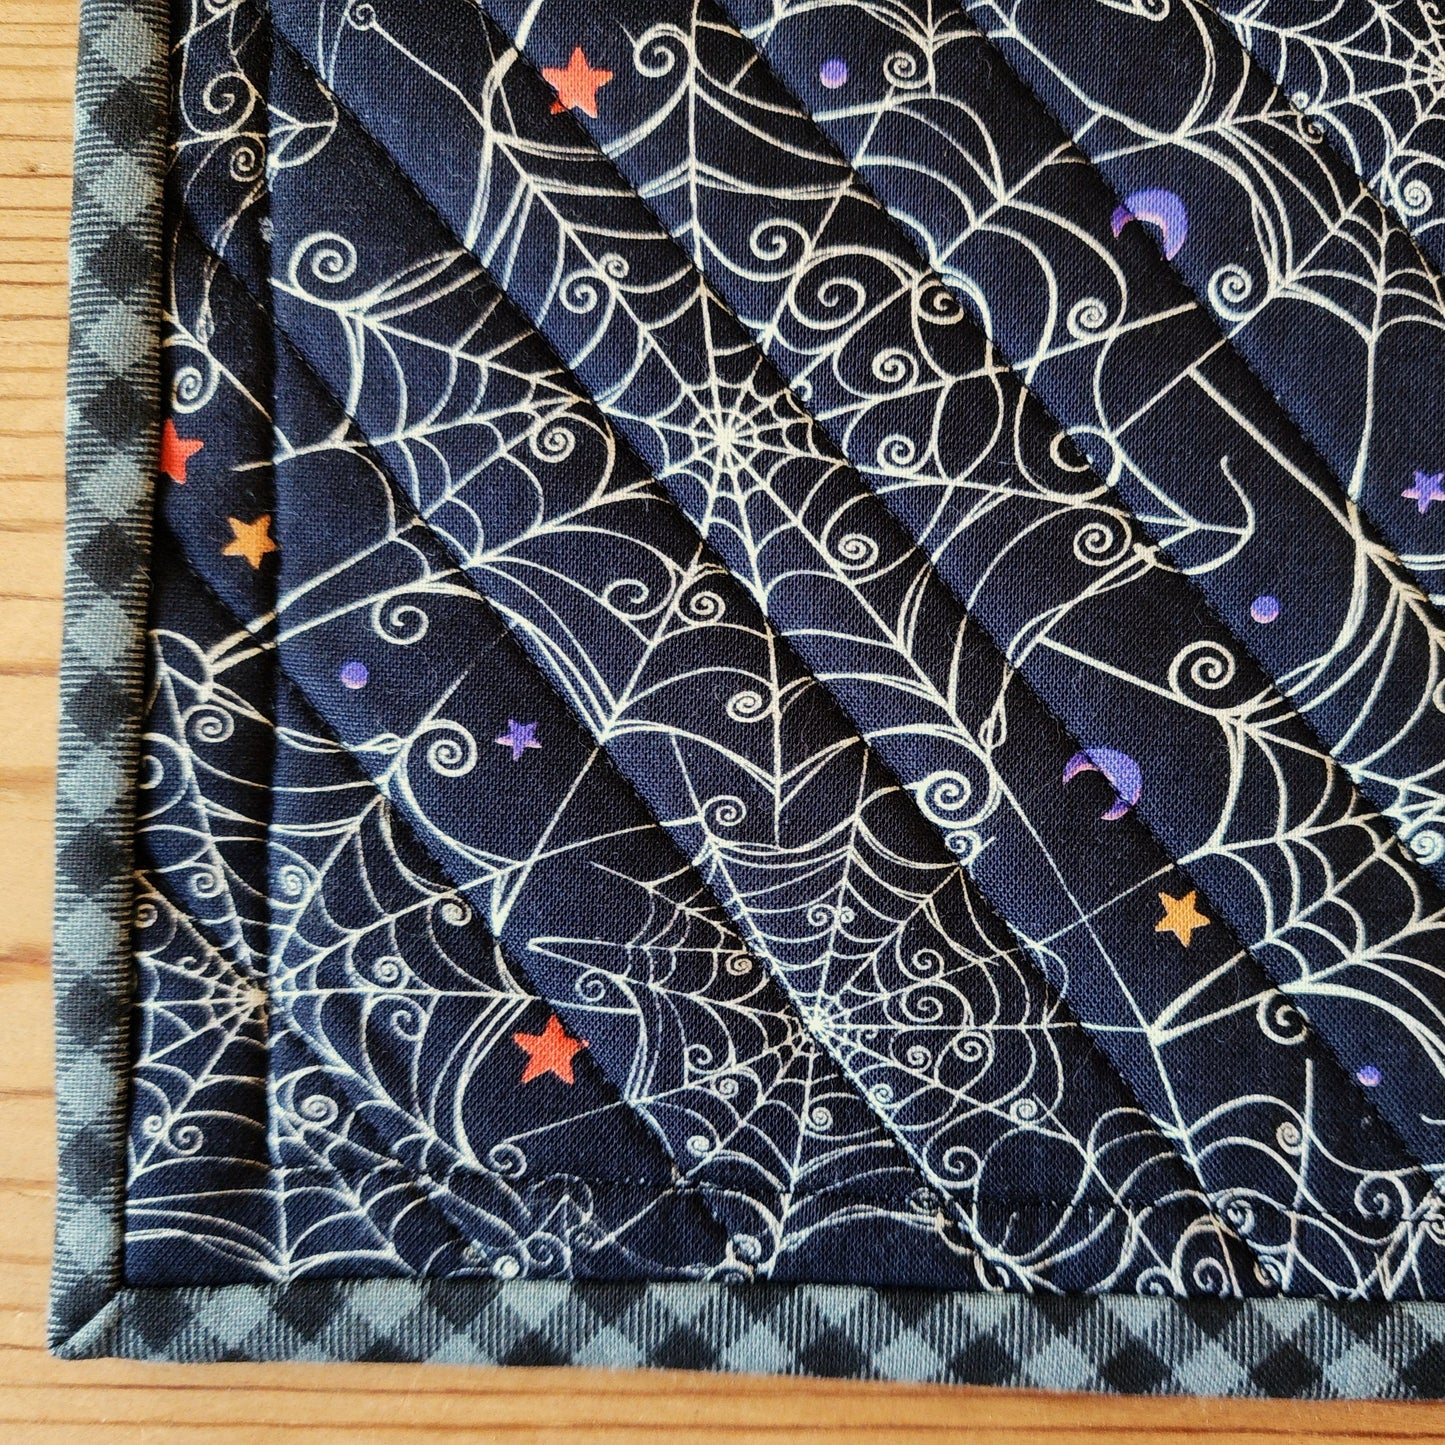 Halloween Themed Quilted Table Runner - Glow in the Dark Stars